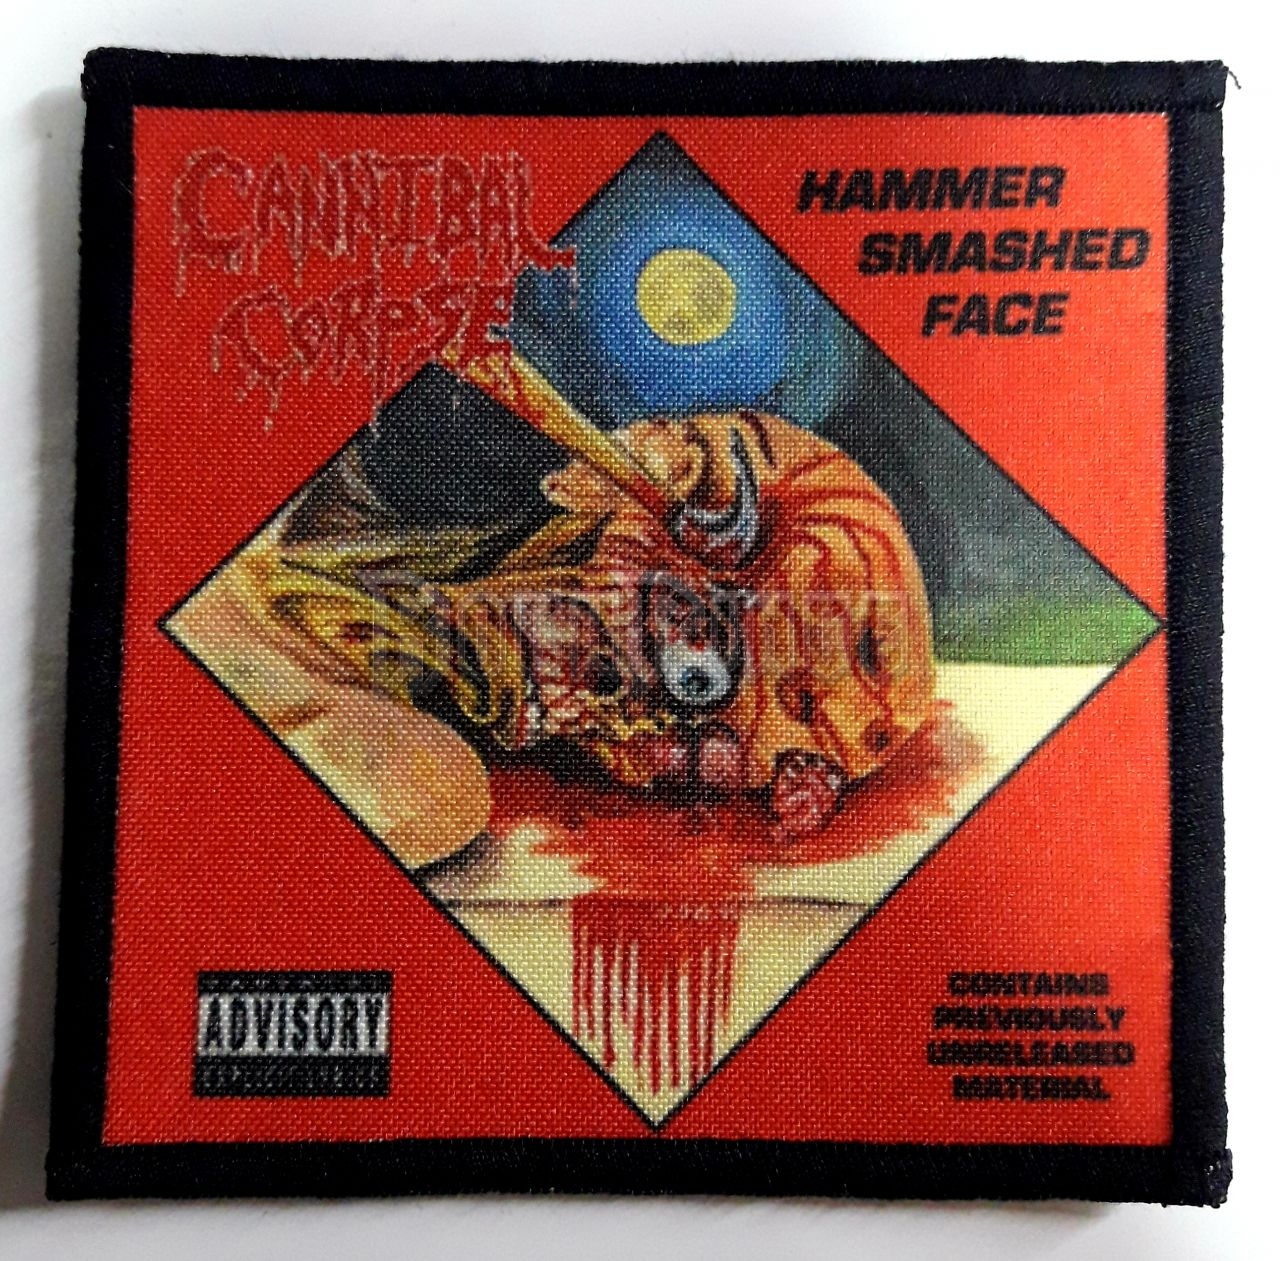 CANNIBAL CORPSE - Hammer Smashed Face - kisfelvarró